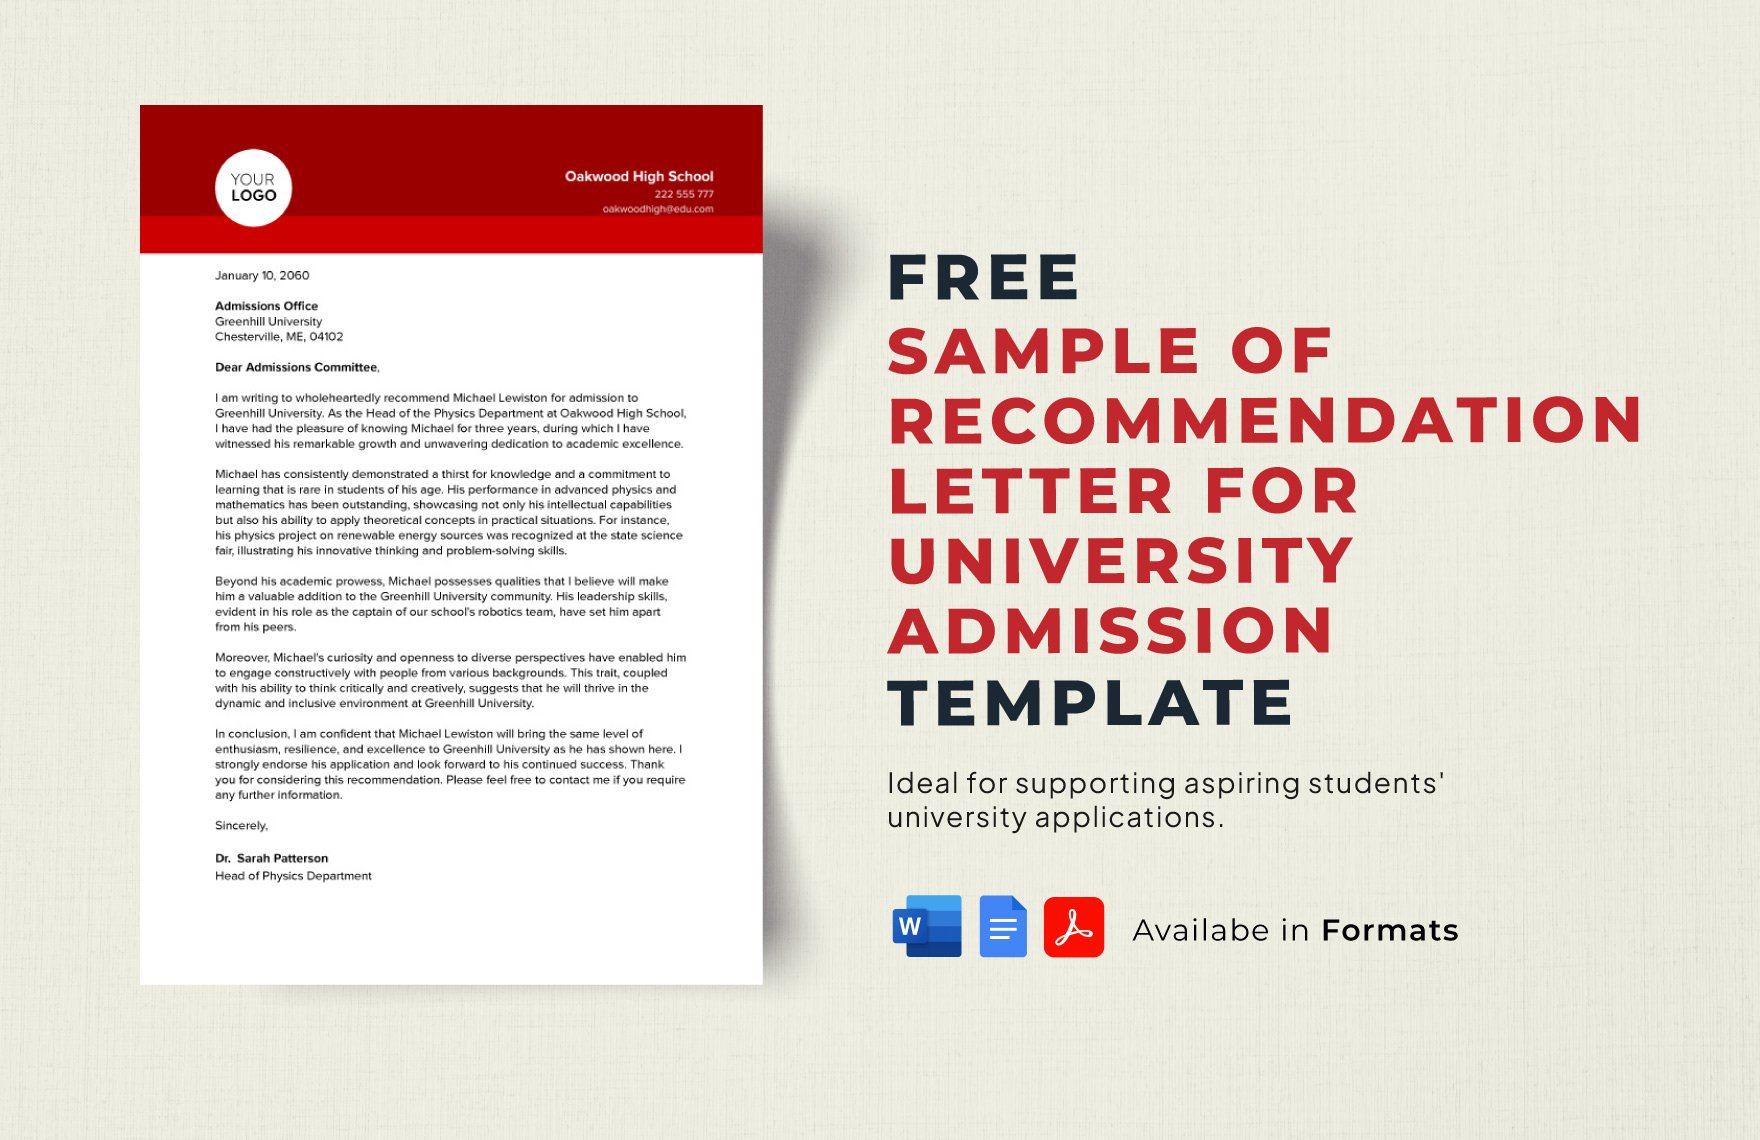 Sample of Recommendation Letter for University Admission Template